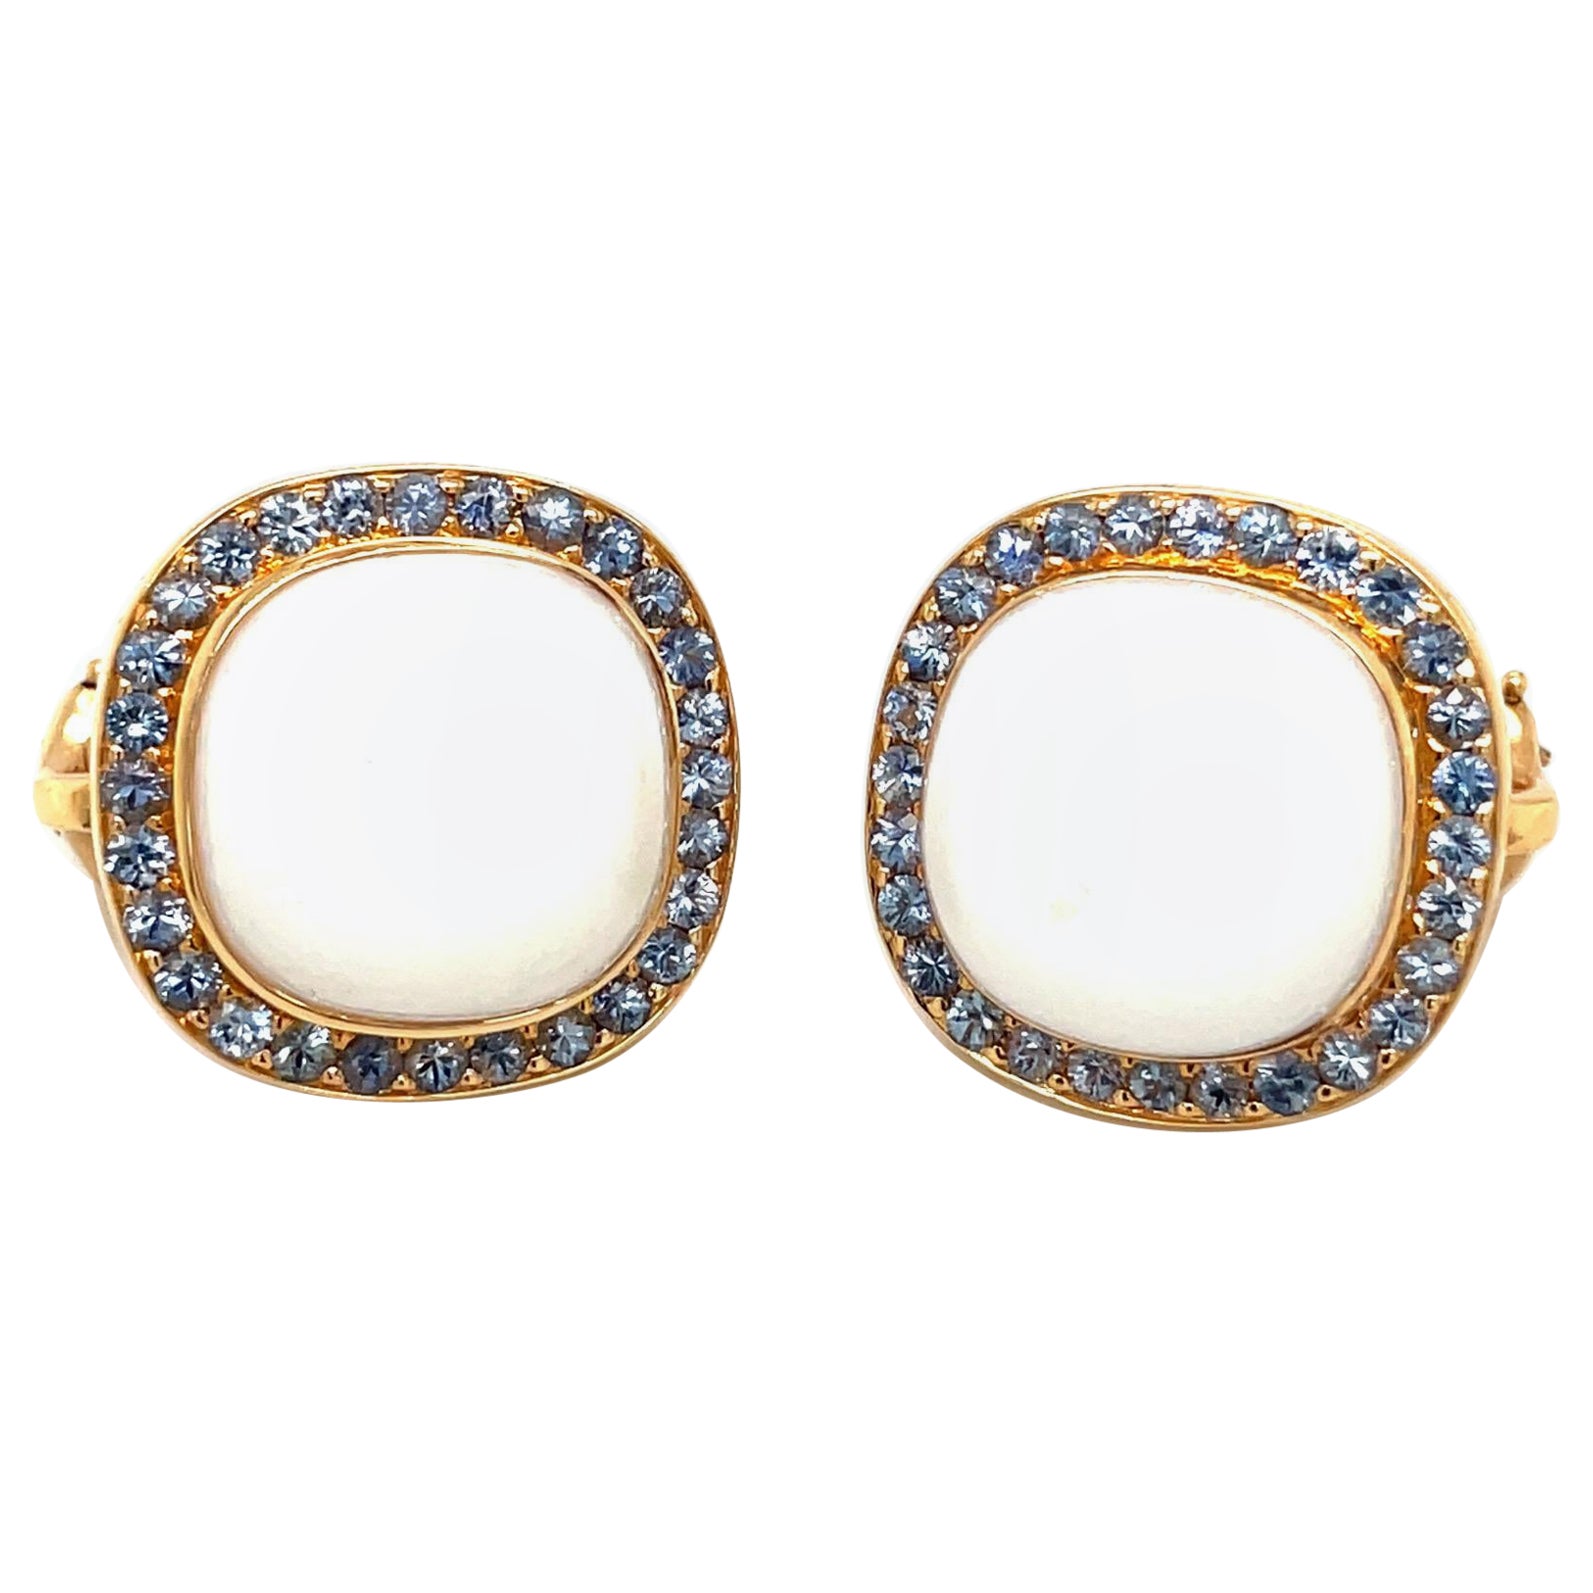 Zorab 18KT Rose Gold Earrings with 27.66Ct. White Opal & 1.88Ct. Blue Sapphire For Sale